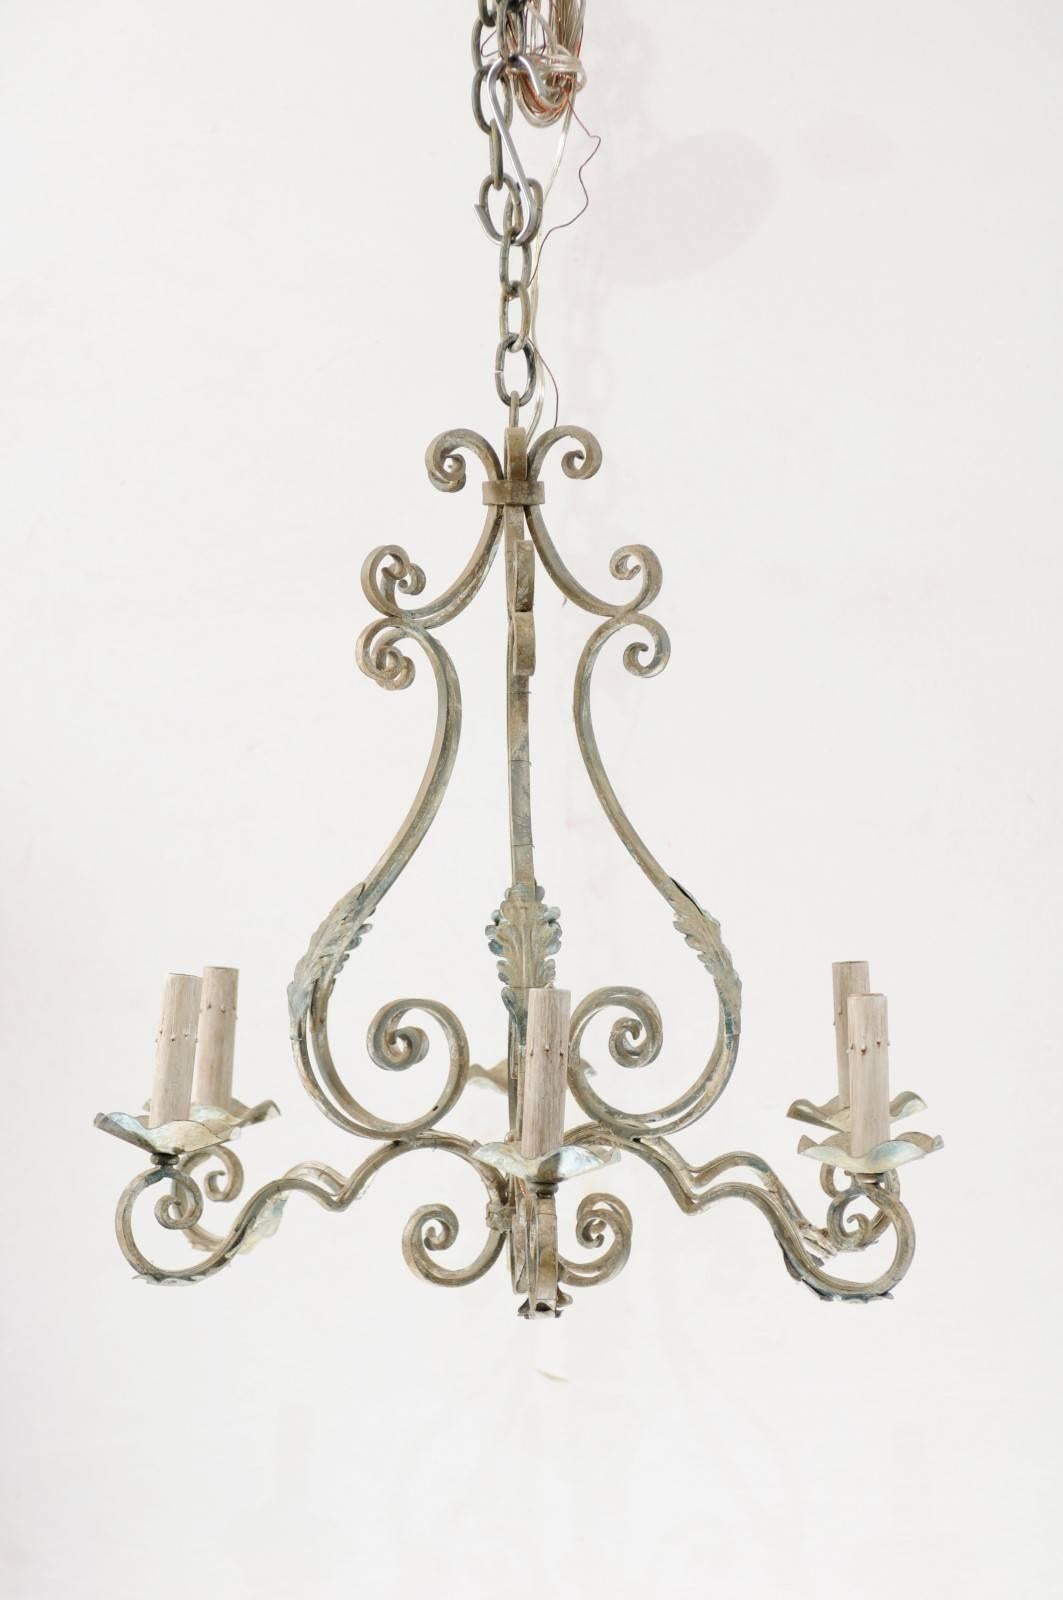 French Six-Light Pear Shaped Painted Iron Chandelier with Ornate Scrolls In Good Condition For Sale In Atlanta, GA